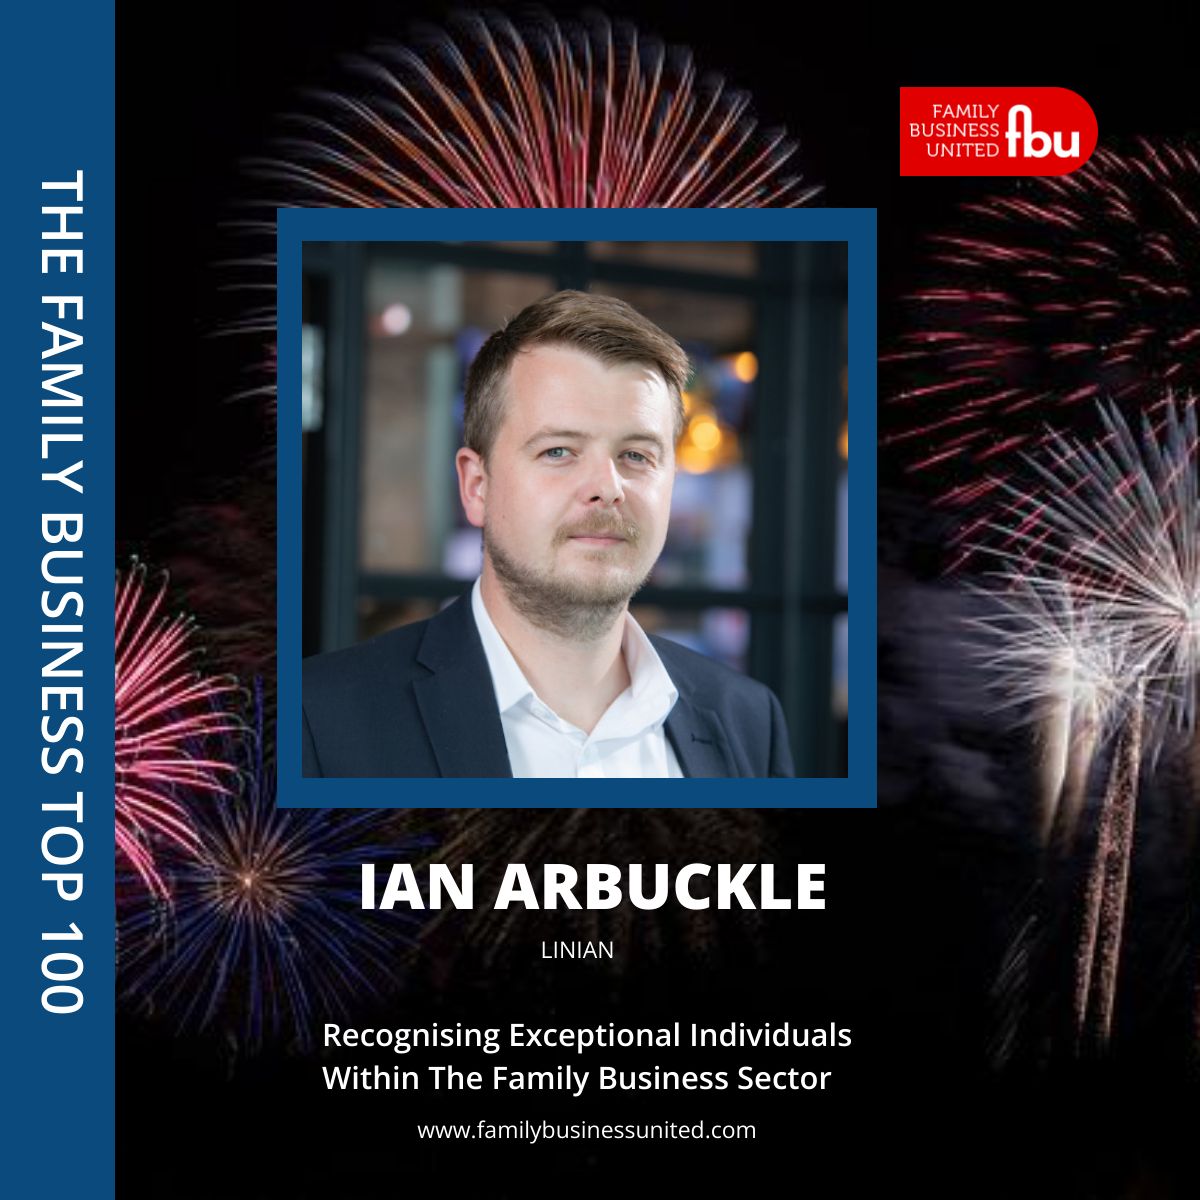 Ian Arbuckle Family Business Top 100 Image